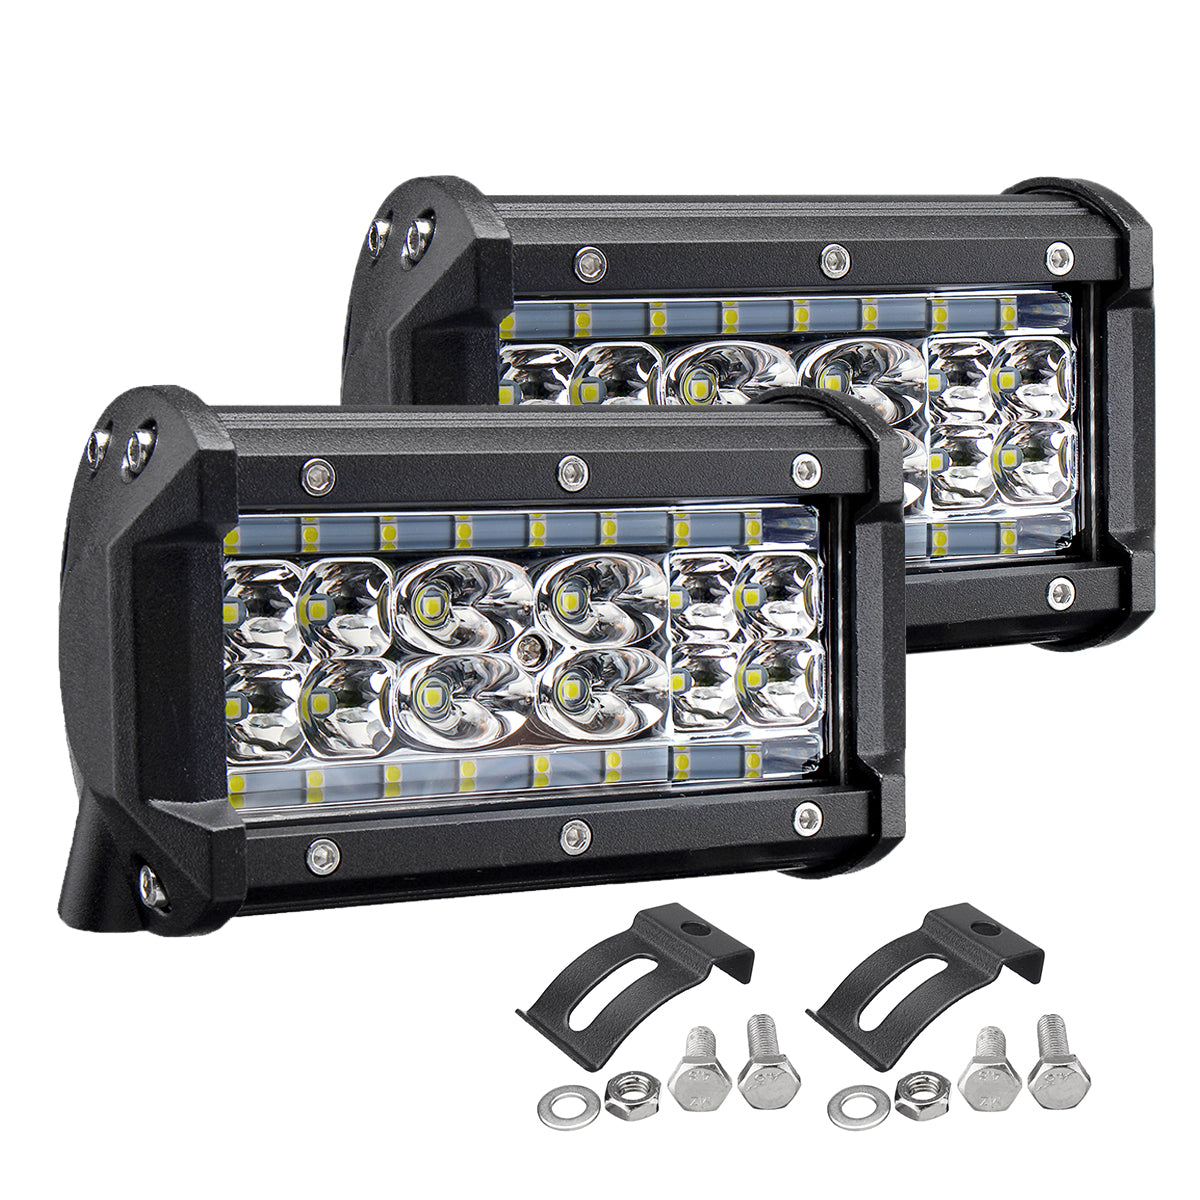 2Pcs 72W 6000LM 5Inch LED Work Light Bar Combo Beam Driving Fog Lamp for Jeep Offroad ATV Truck